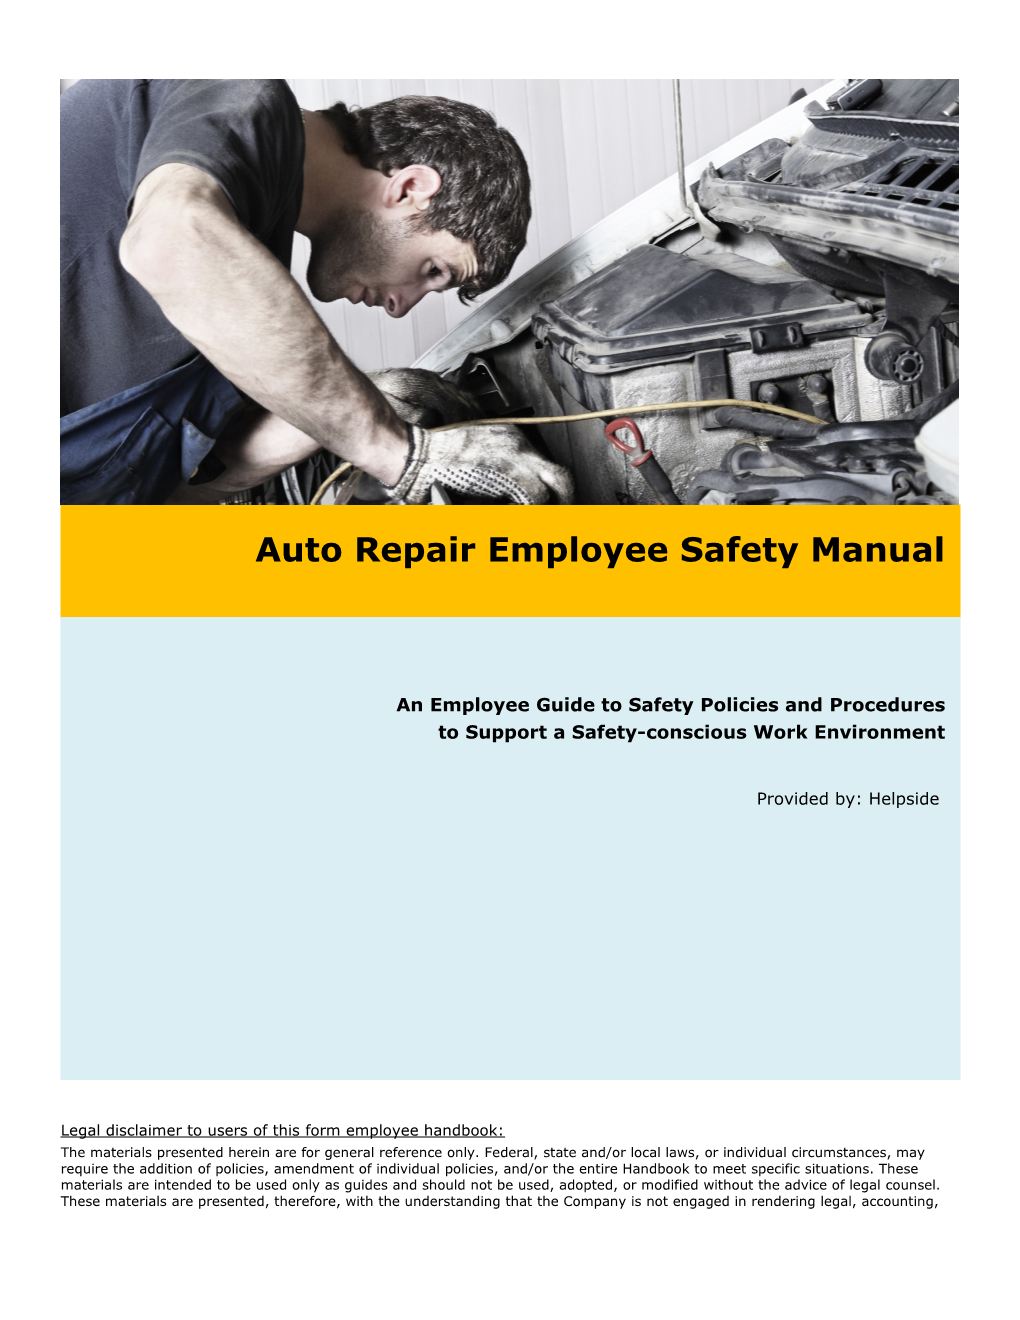 Auto Repair Employee Safety Manual